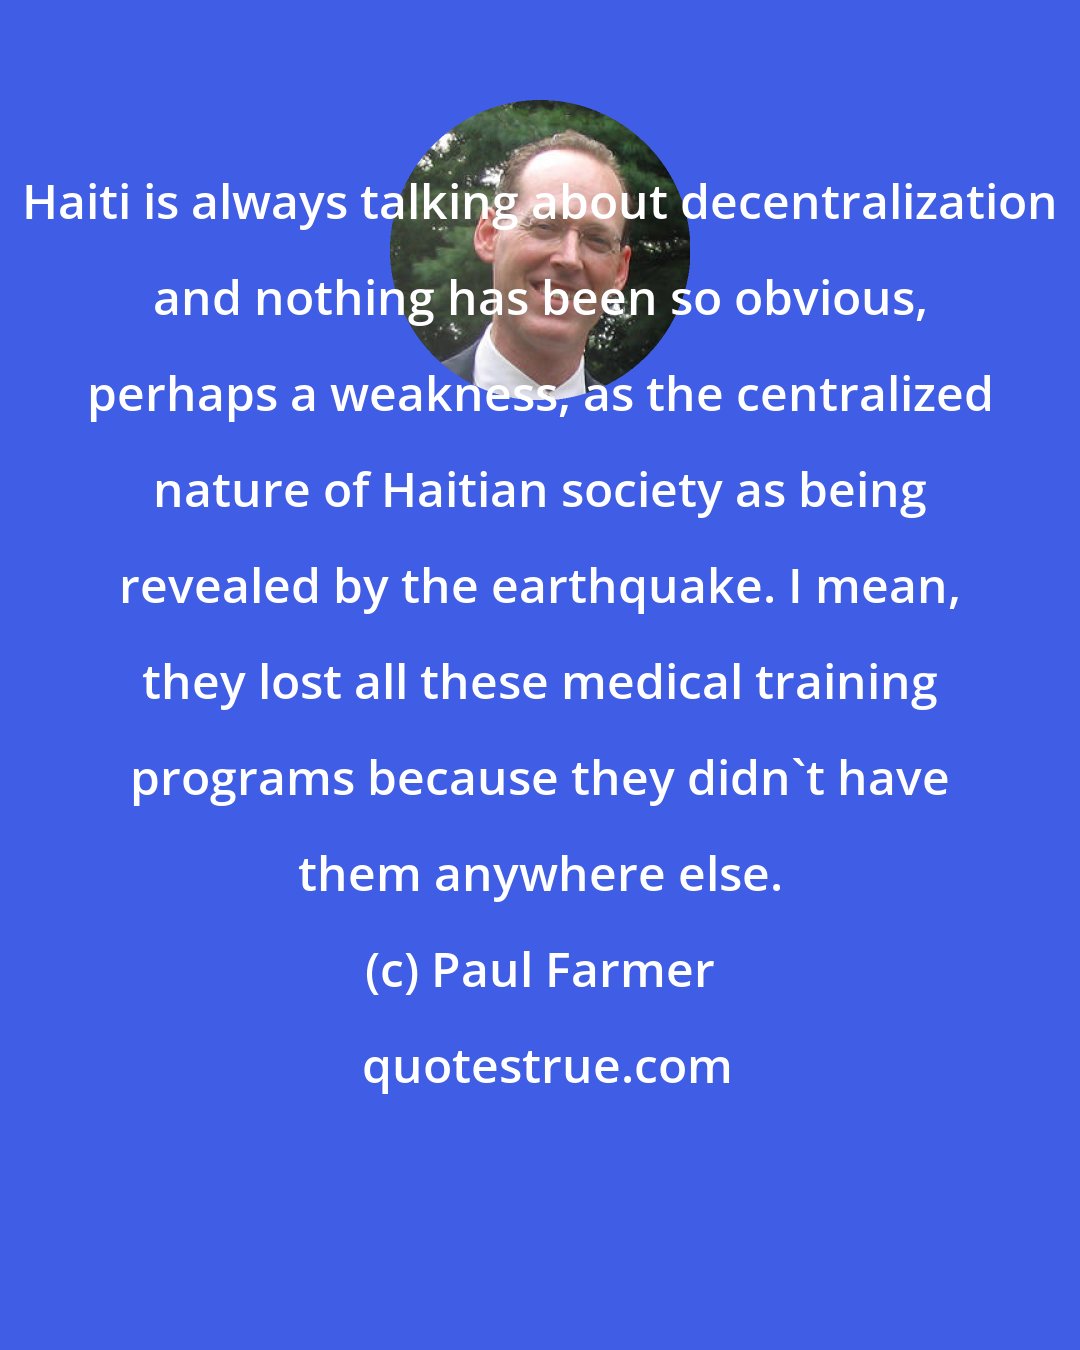 Paul Farmer: Haiti is always talking about decentralization and nothing has been so obvious, perhaps a weakness, as the centralized nature of Haitian society as being revealed by the earthquake. I mean, they lost all these medical training programs because they didn't have them anywhere else.